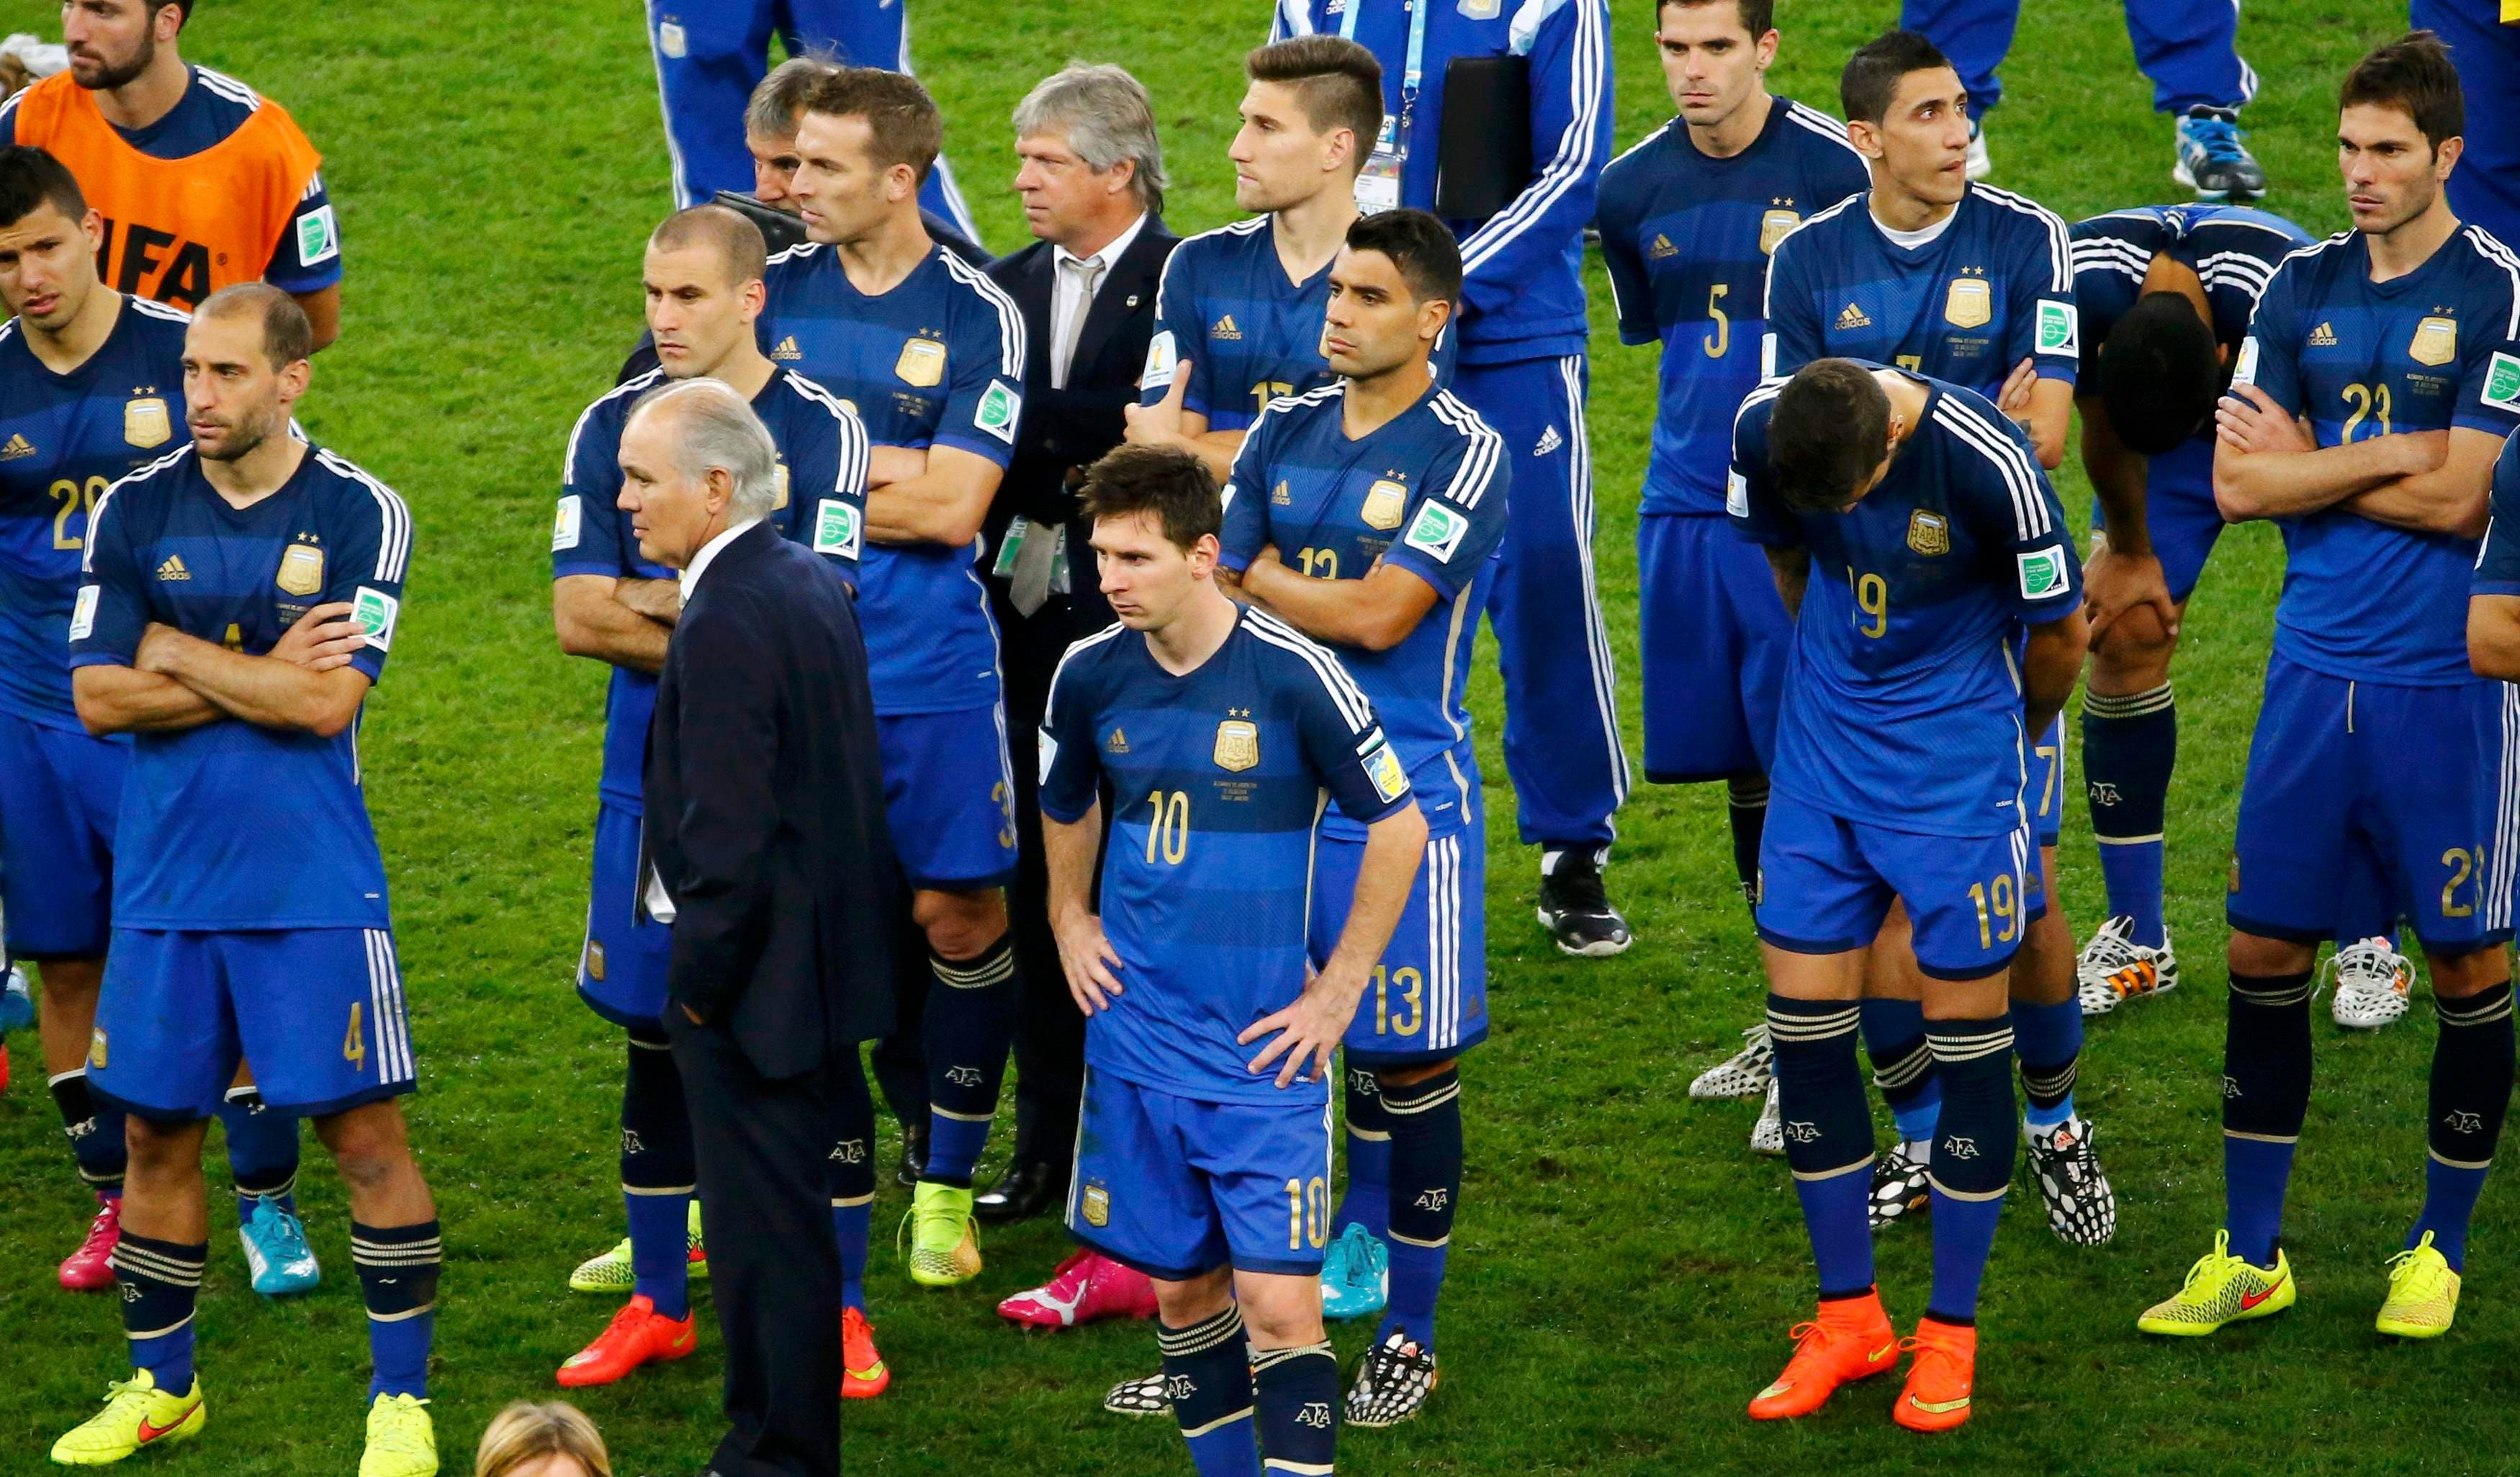 Argentina's coach Alejandro Sabella stands between his players after their loss to Germany in their 2014 World Cup final at the Maracana stadium in Rio de Janeiro July 13, 2014. 